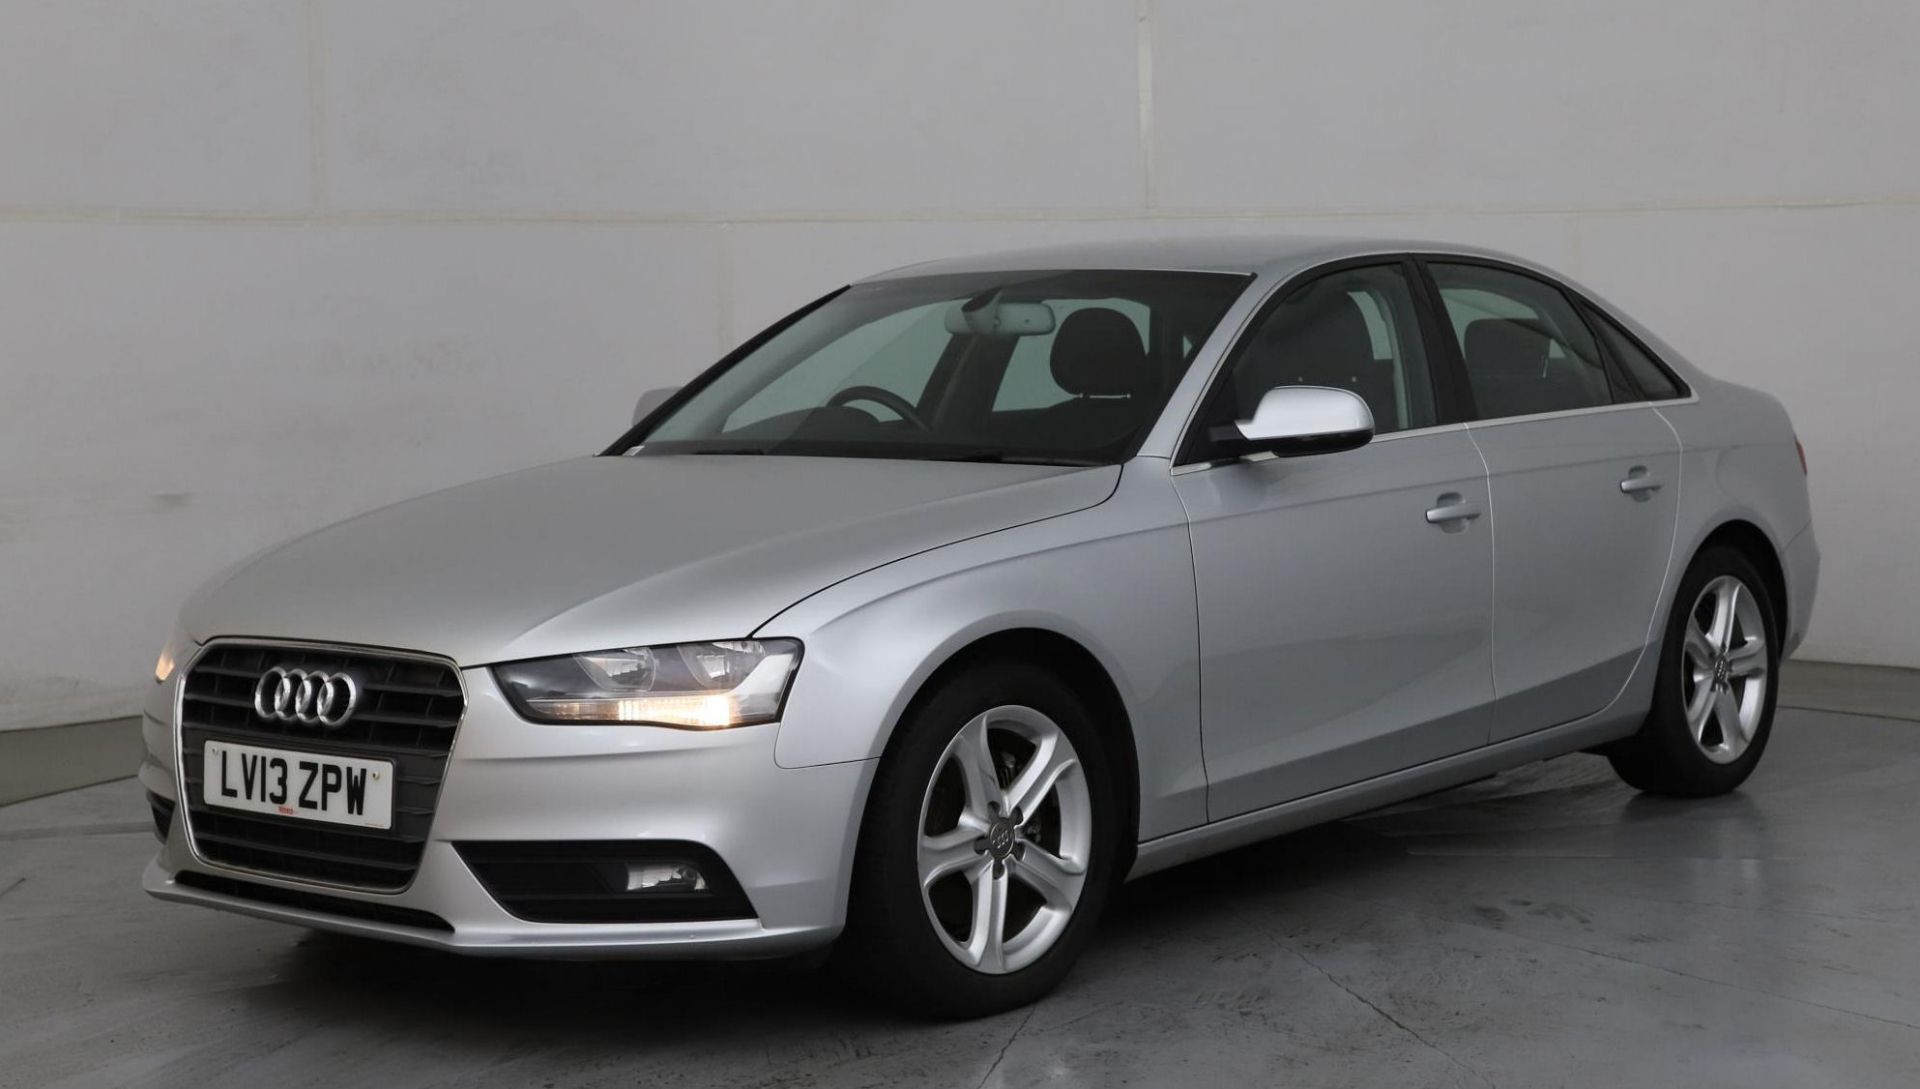 2013 Audi A4 2.0 Tdi SE 4 Door Saloon - CL505 - NO VAT ON THE HAMMER - Location: Corby - Image 10 of 12